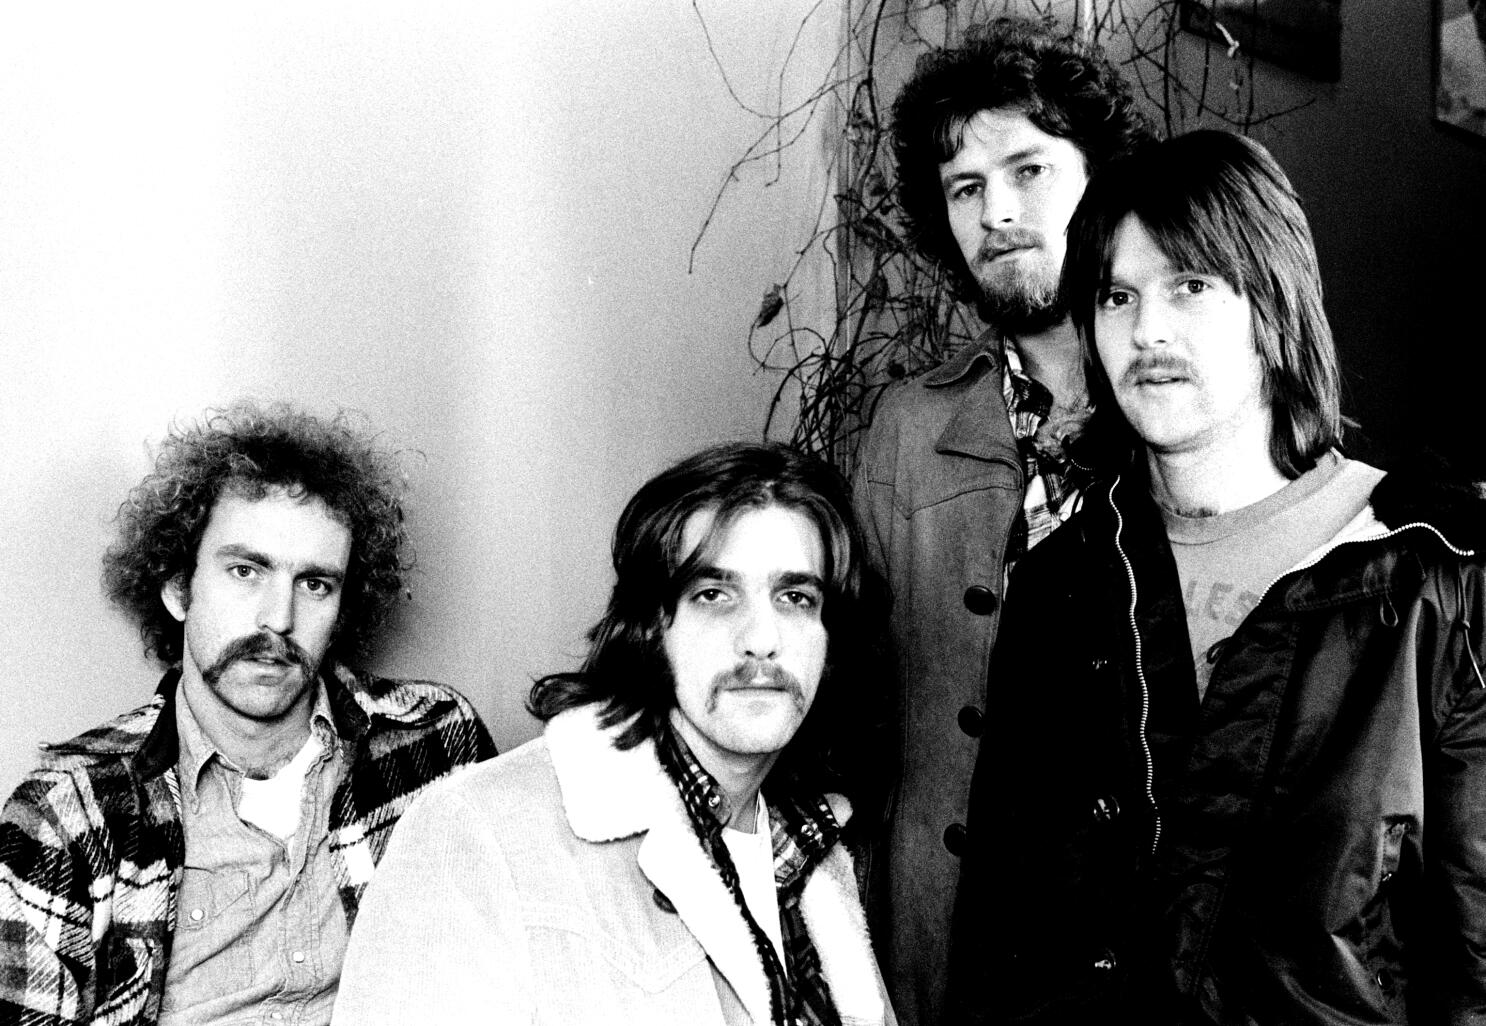 Glenn Frey: The Eagles rocker who took it to the limit, The Independent